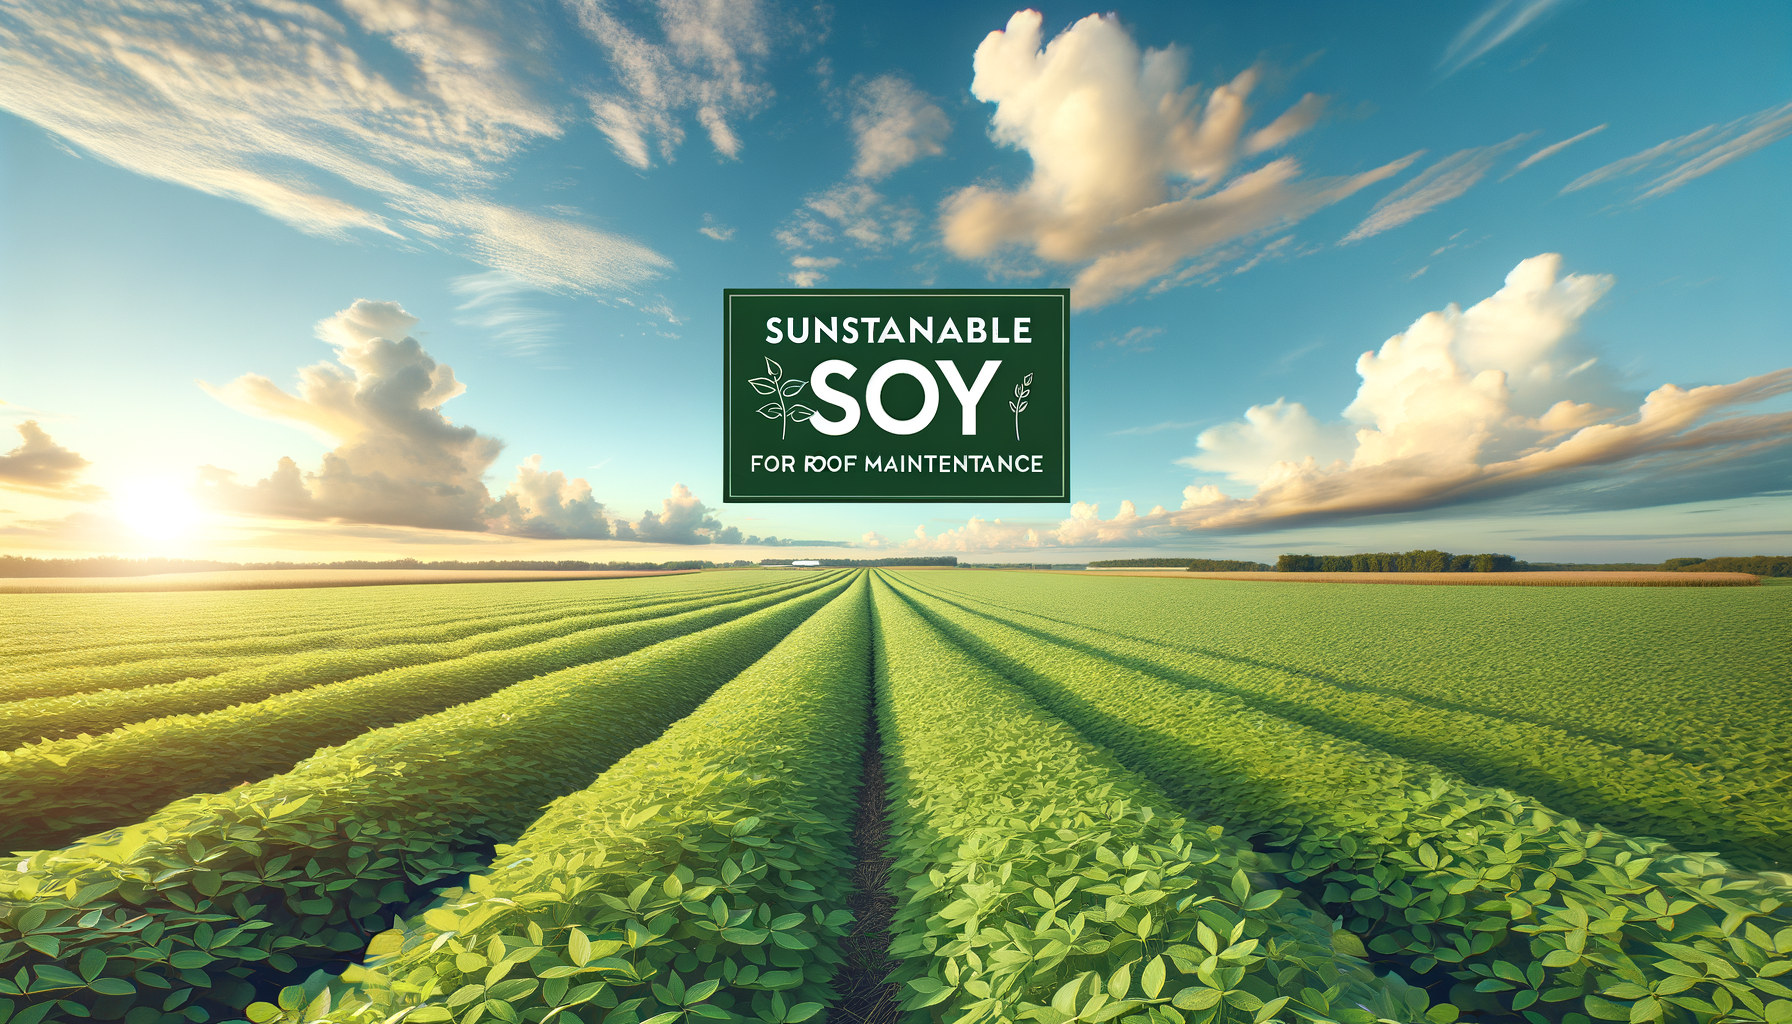 ALT: Sustainable soy field for Roof Maxx production